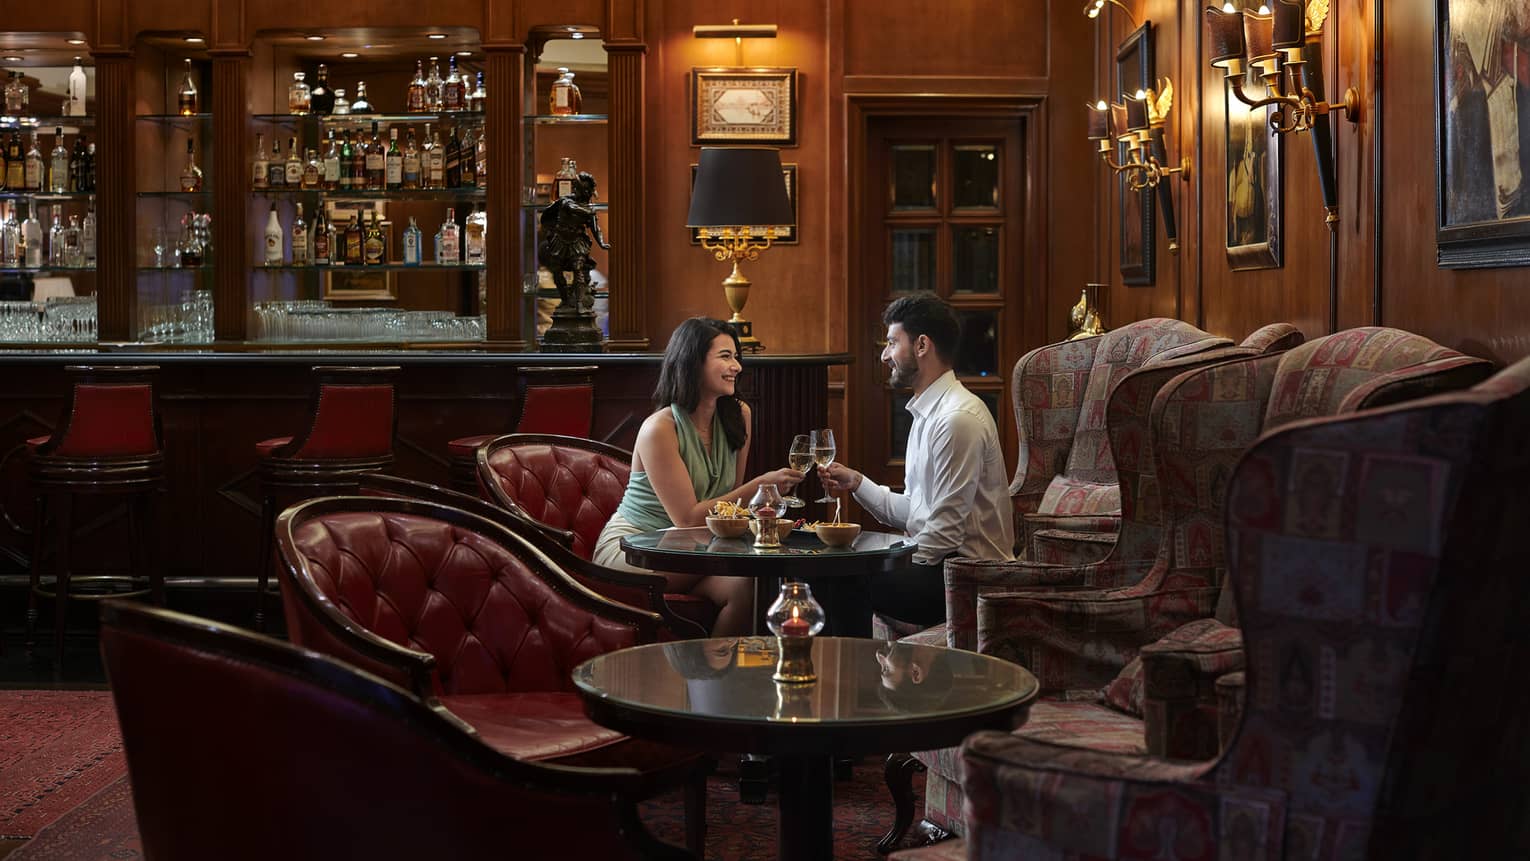 Couple enjoys a glass of wine in the sitting area of Le Bar